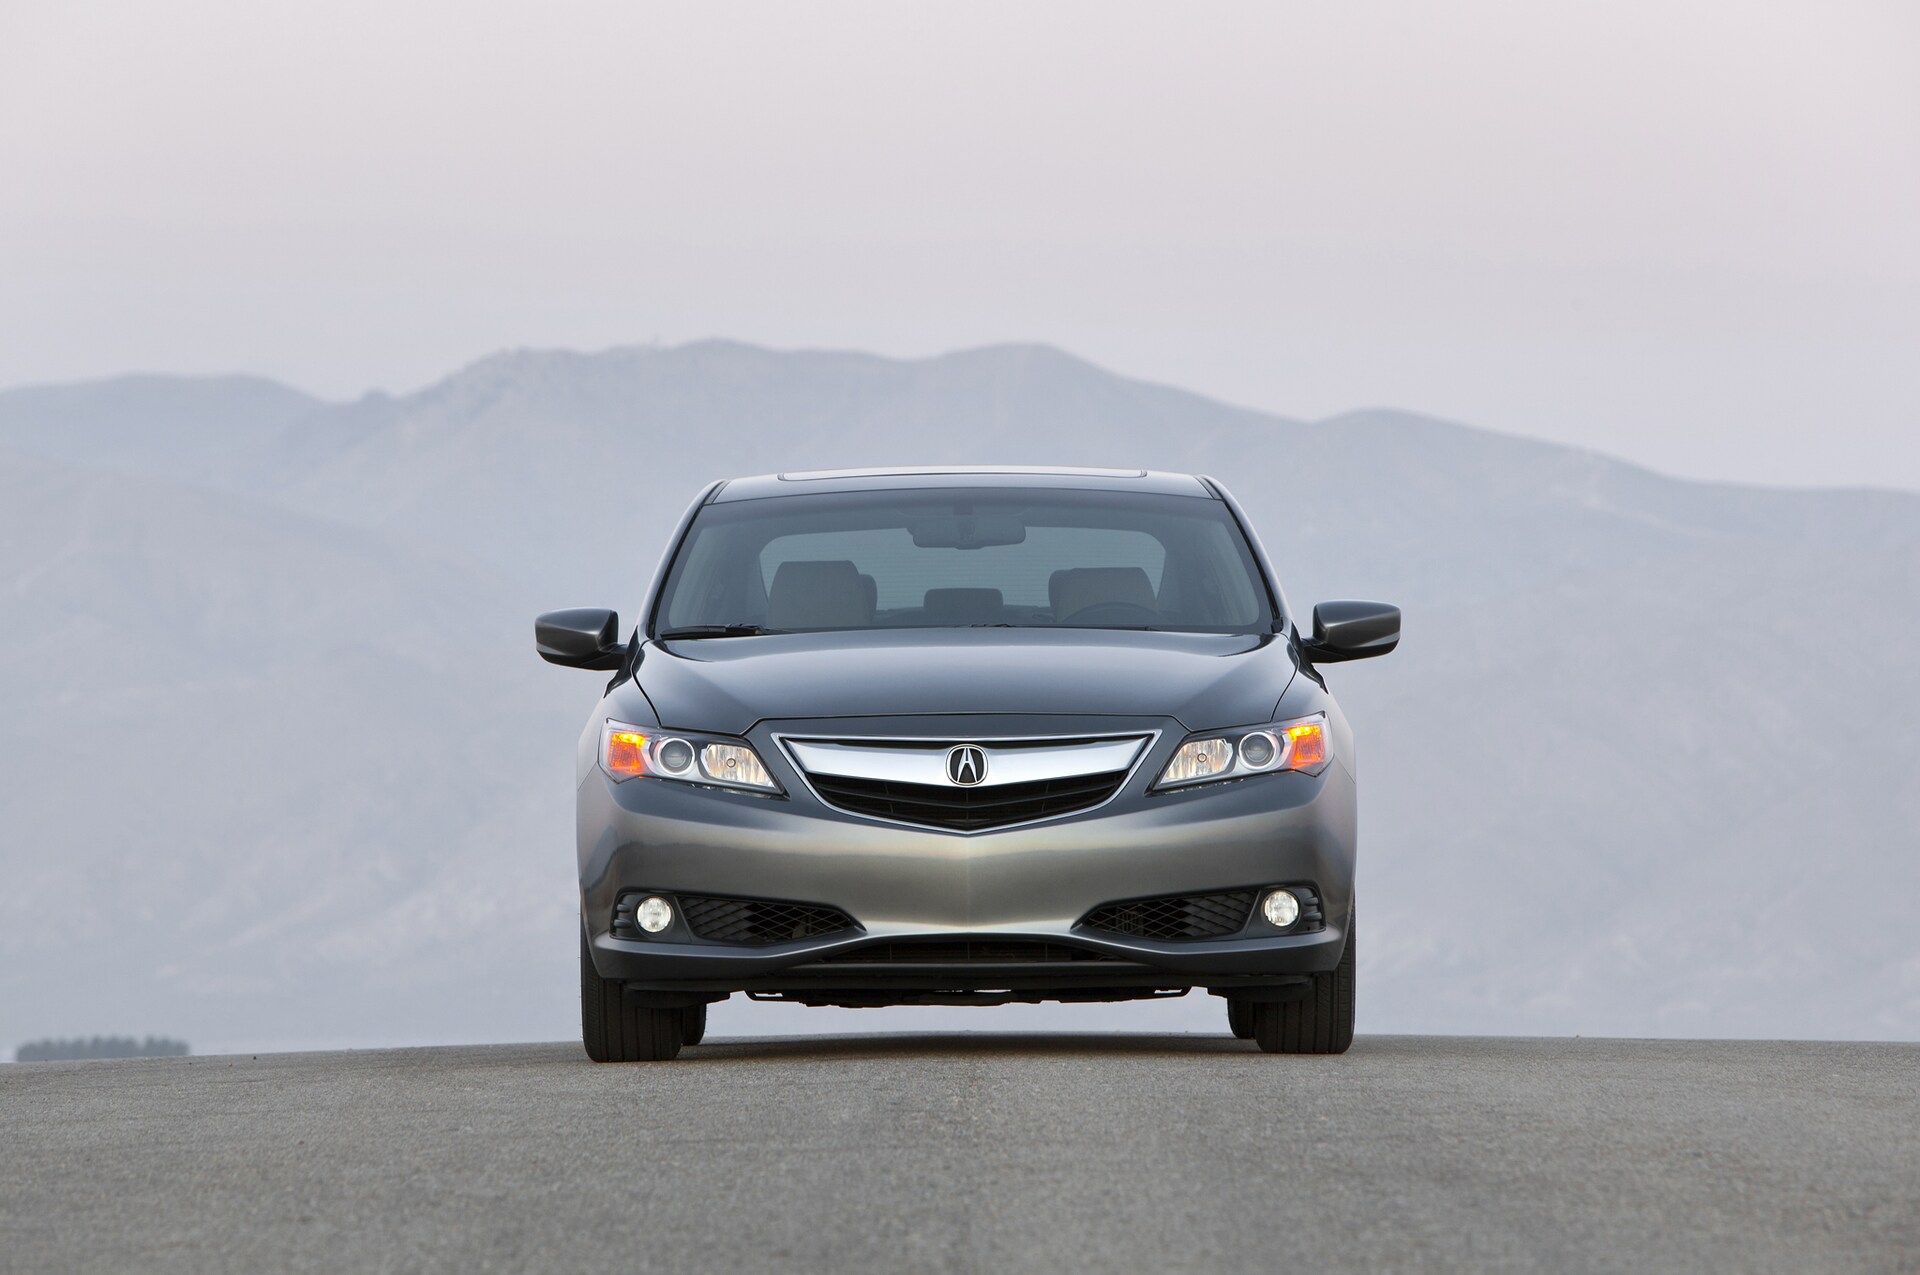 2015 Acura ILX Starts at $27,945, $150 More Than 2014 Model